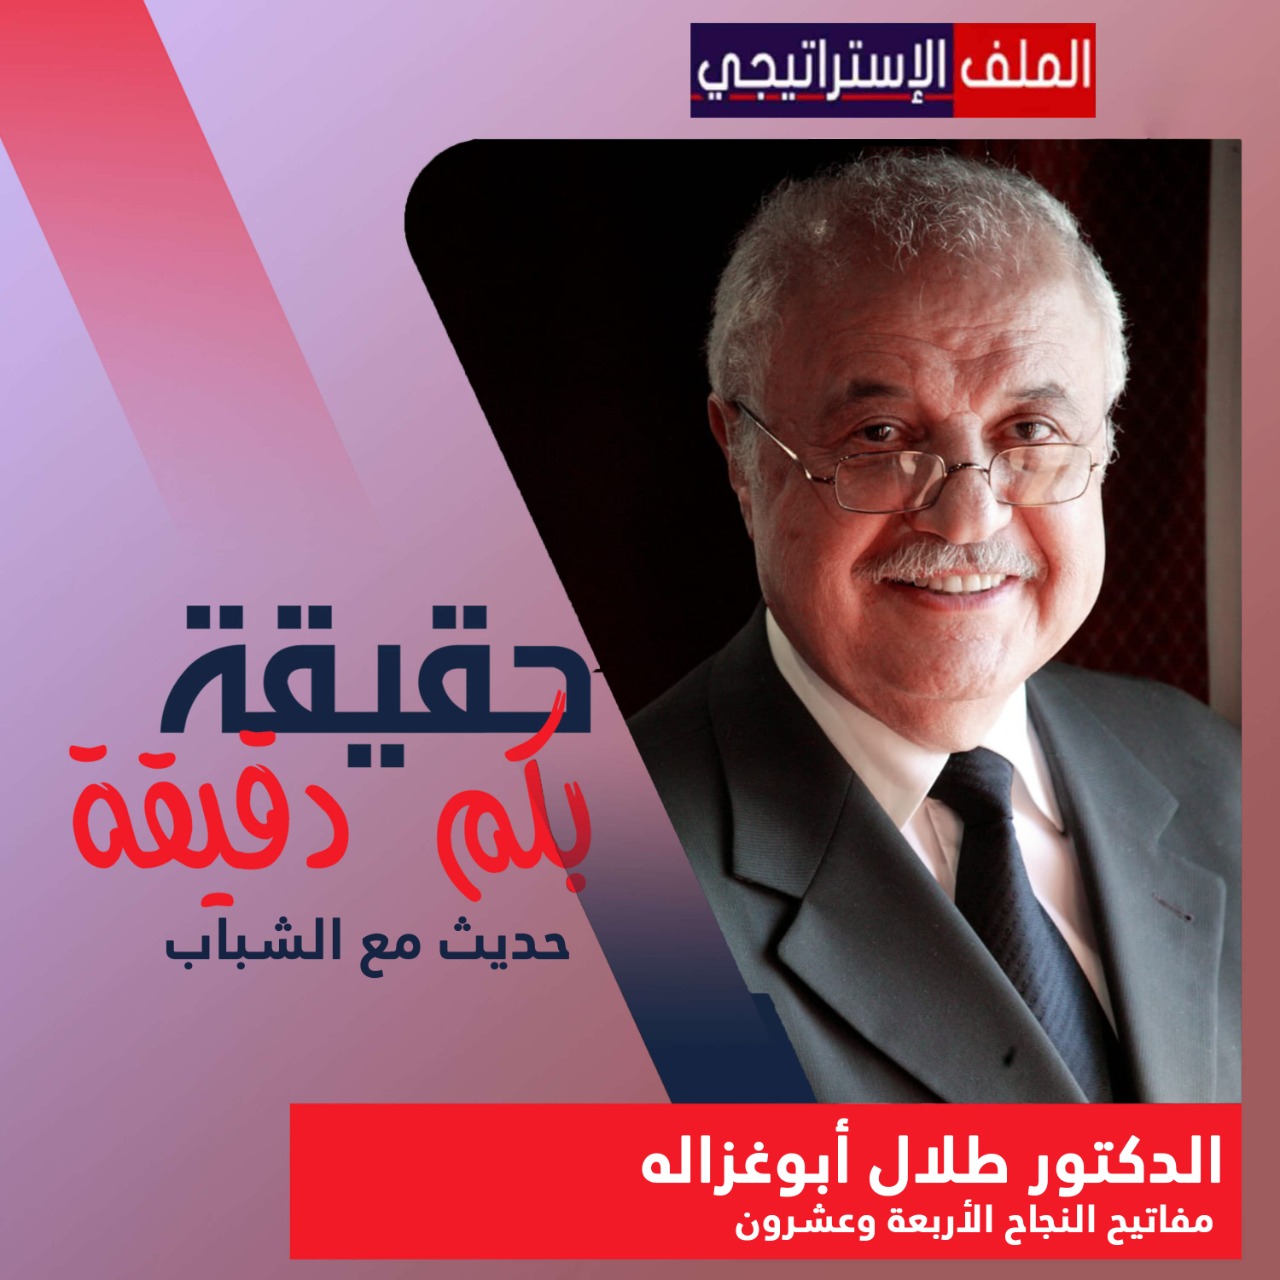 Podeo Platform Launches ‘The Truth in  Few Minutes’ Program with Dr. Abu-Ghazaleh